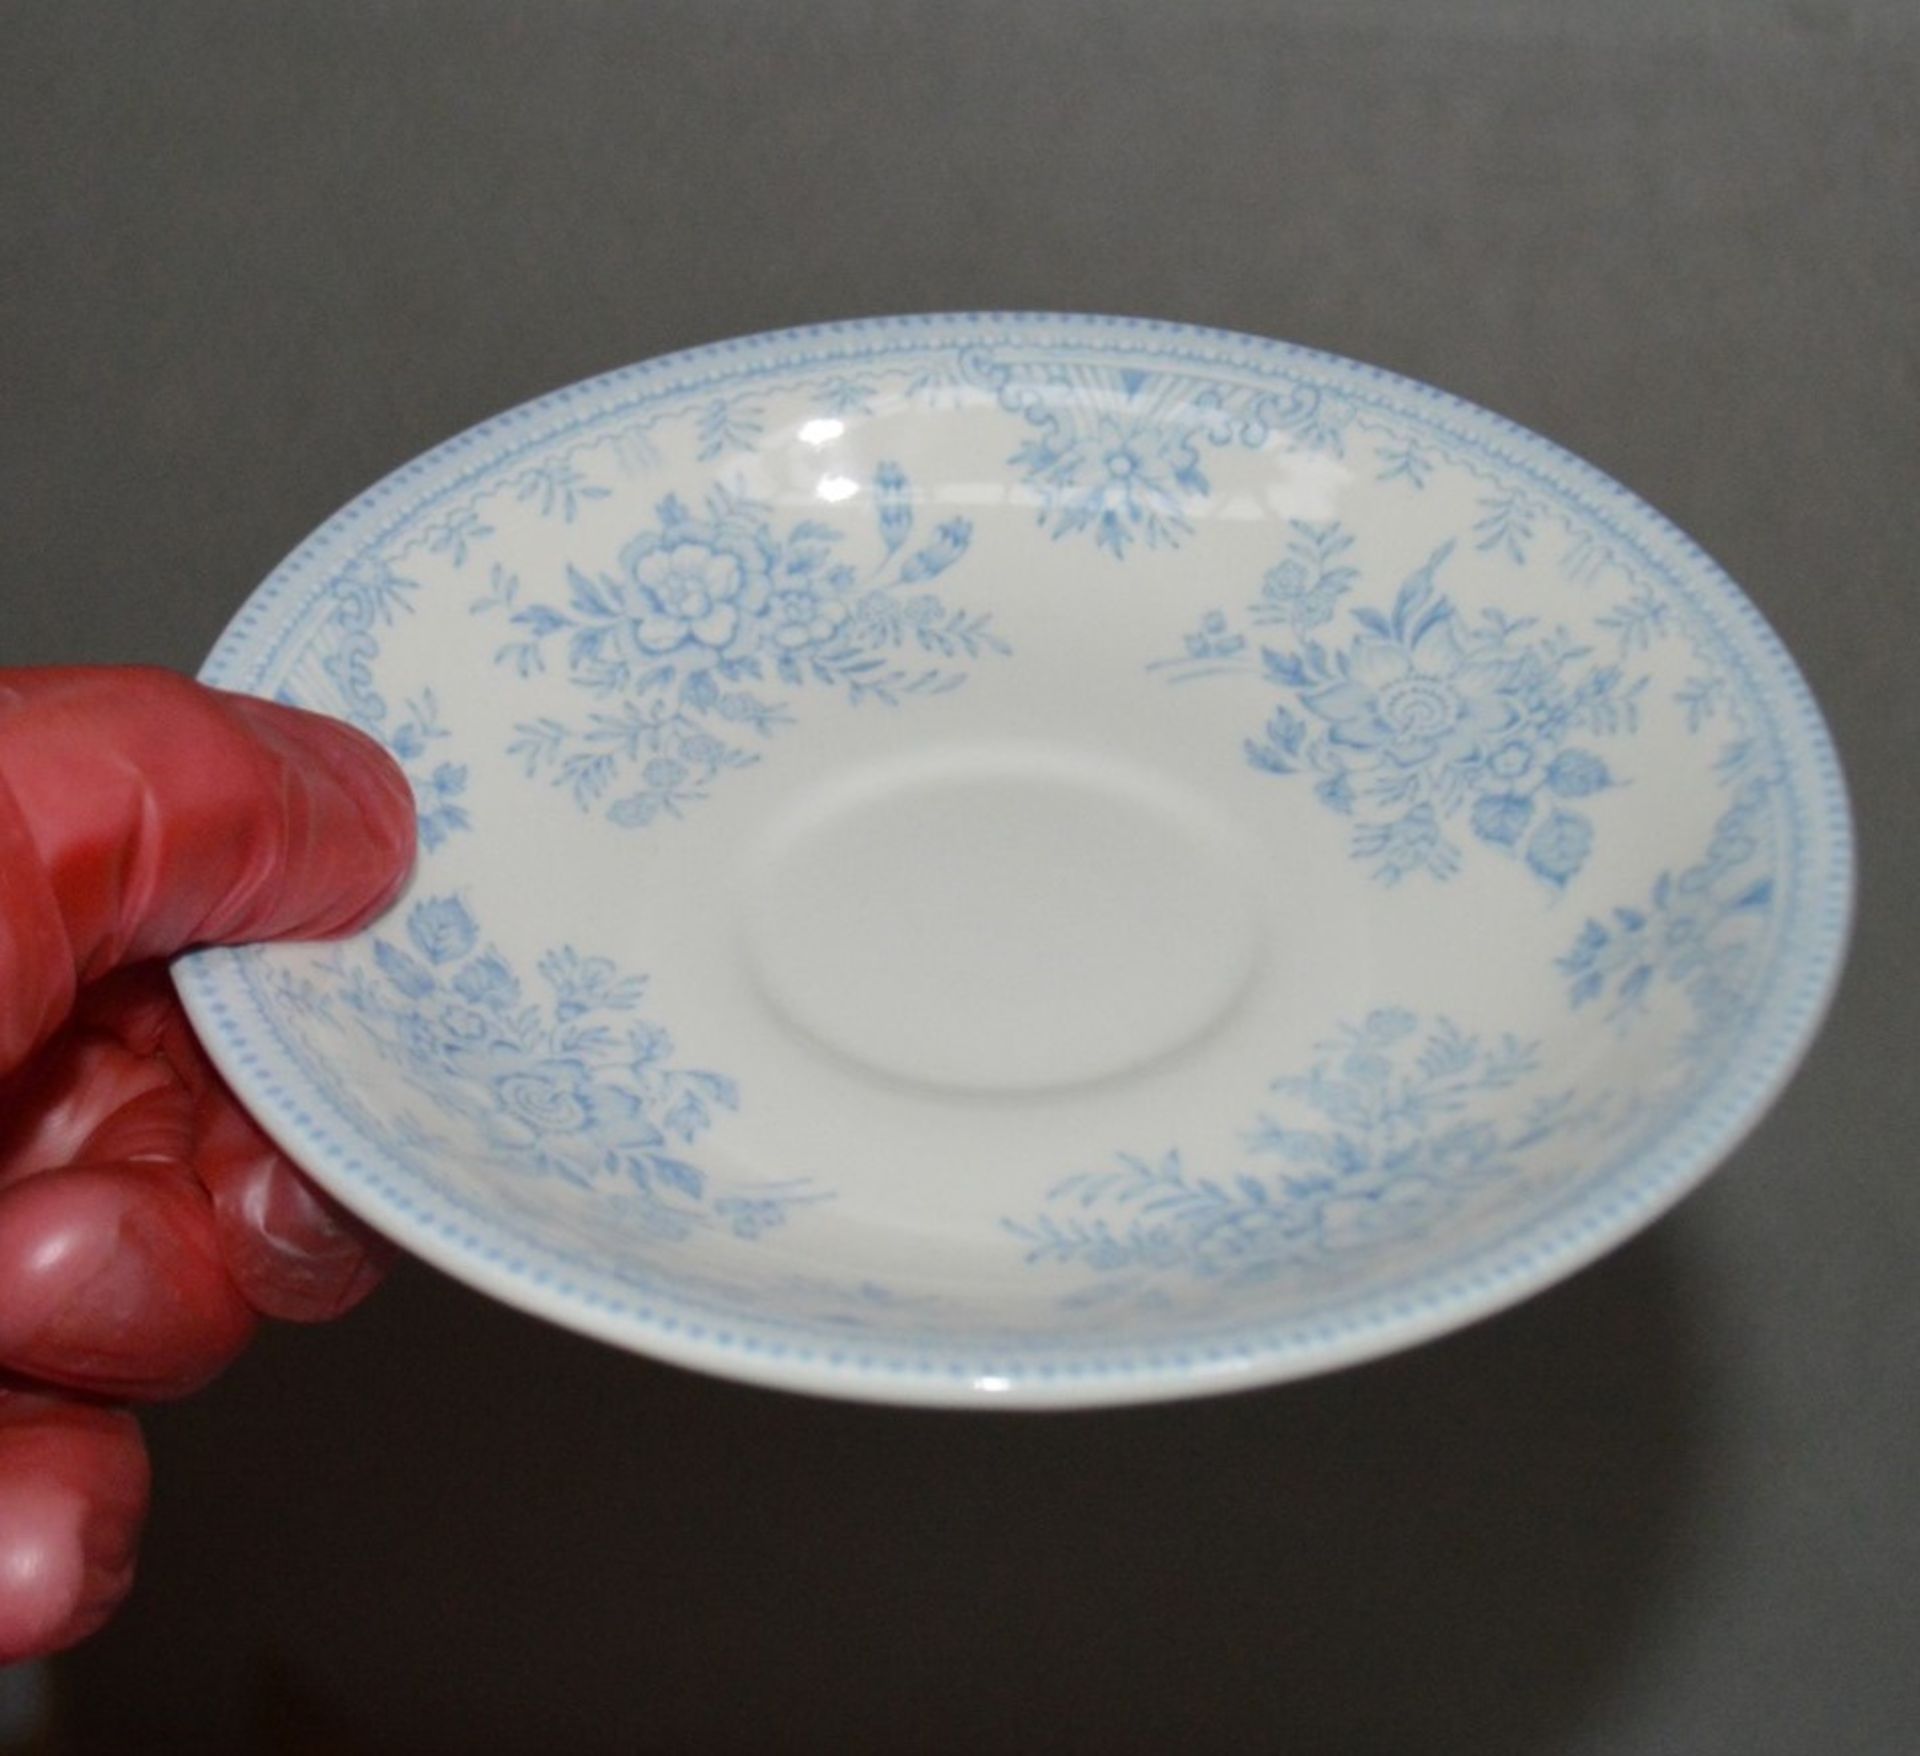 12 x BURLEIGH 'Blue Asiatic Pheasants' Handmade Teacup-Saucers - Unboxed Stock - Ref: HHW211-212/ - Image 2 of 5